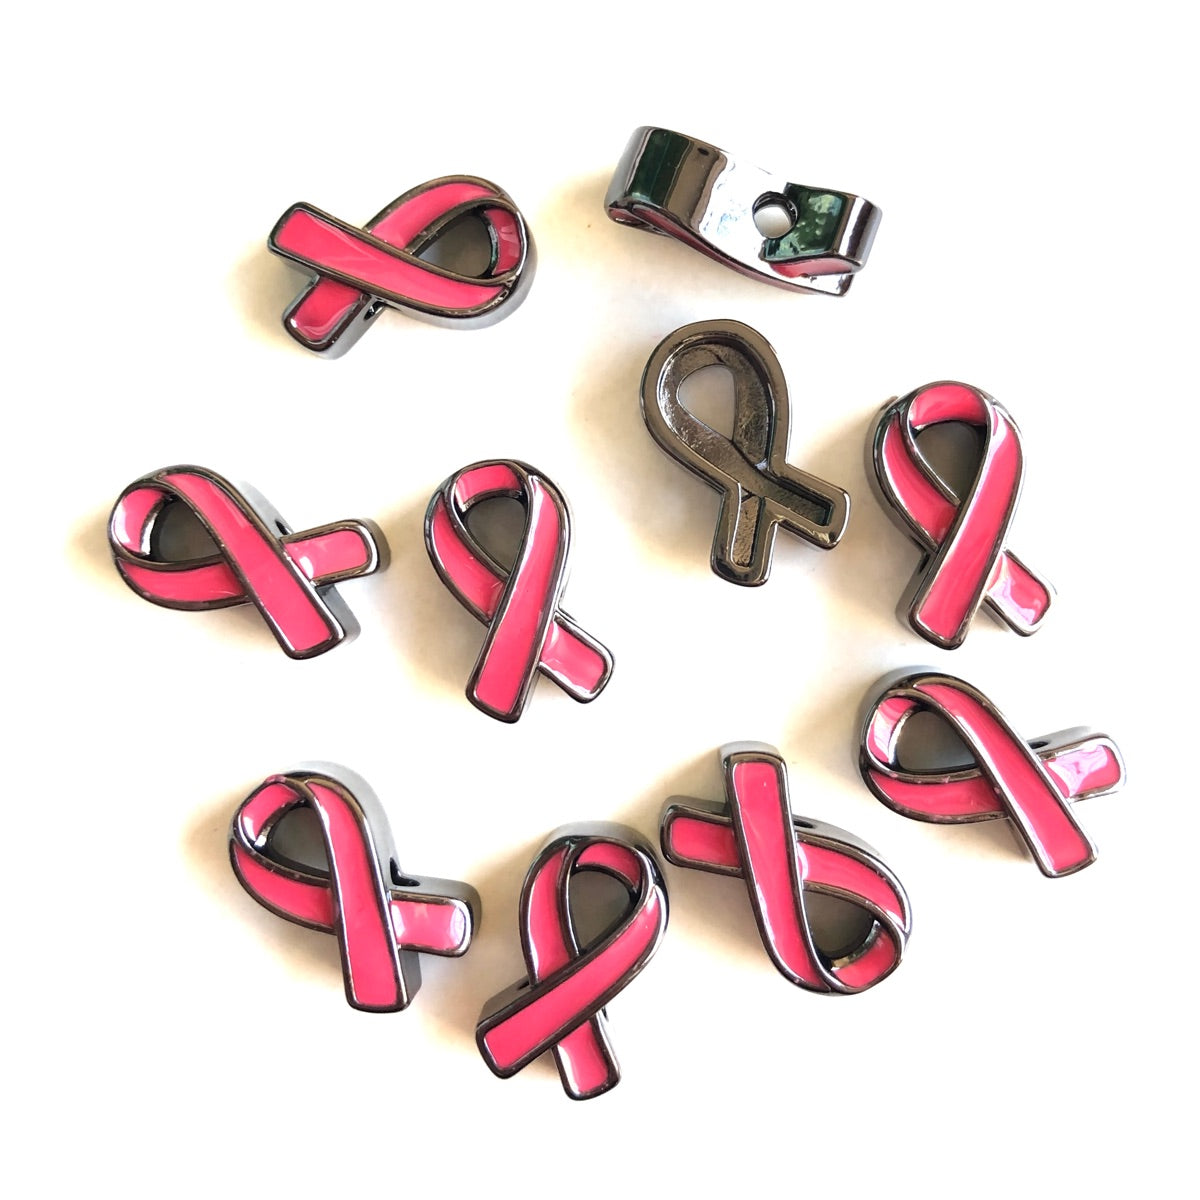 10-20pcs/lot Enamel Pink Ribbon Spacers Beads for Breast Cancer Awareness Black CZ Paved Spacers Breast Cancer Awareness New Spacers Arrivals Charms Beads Beyond